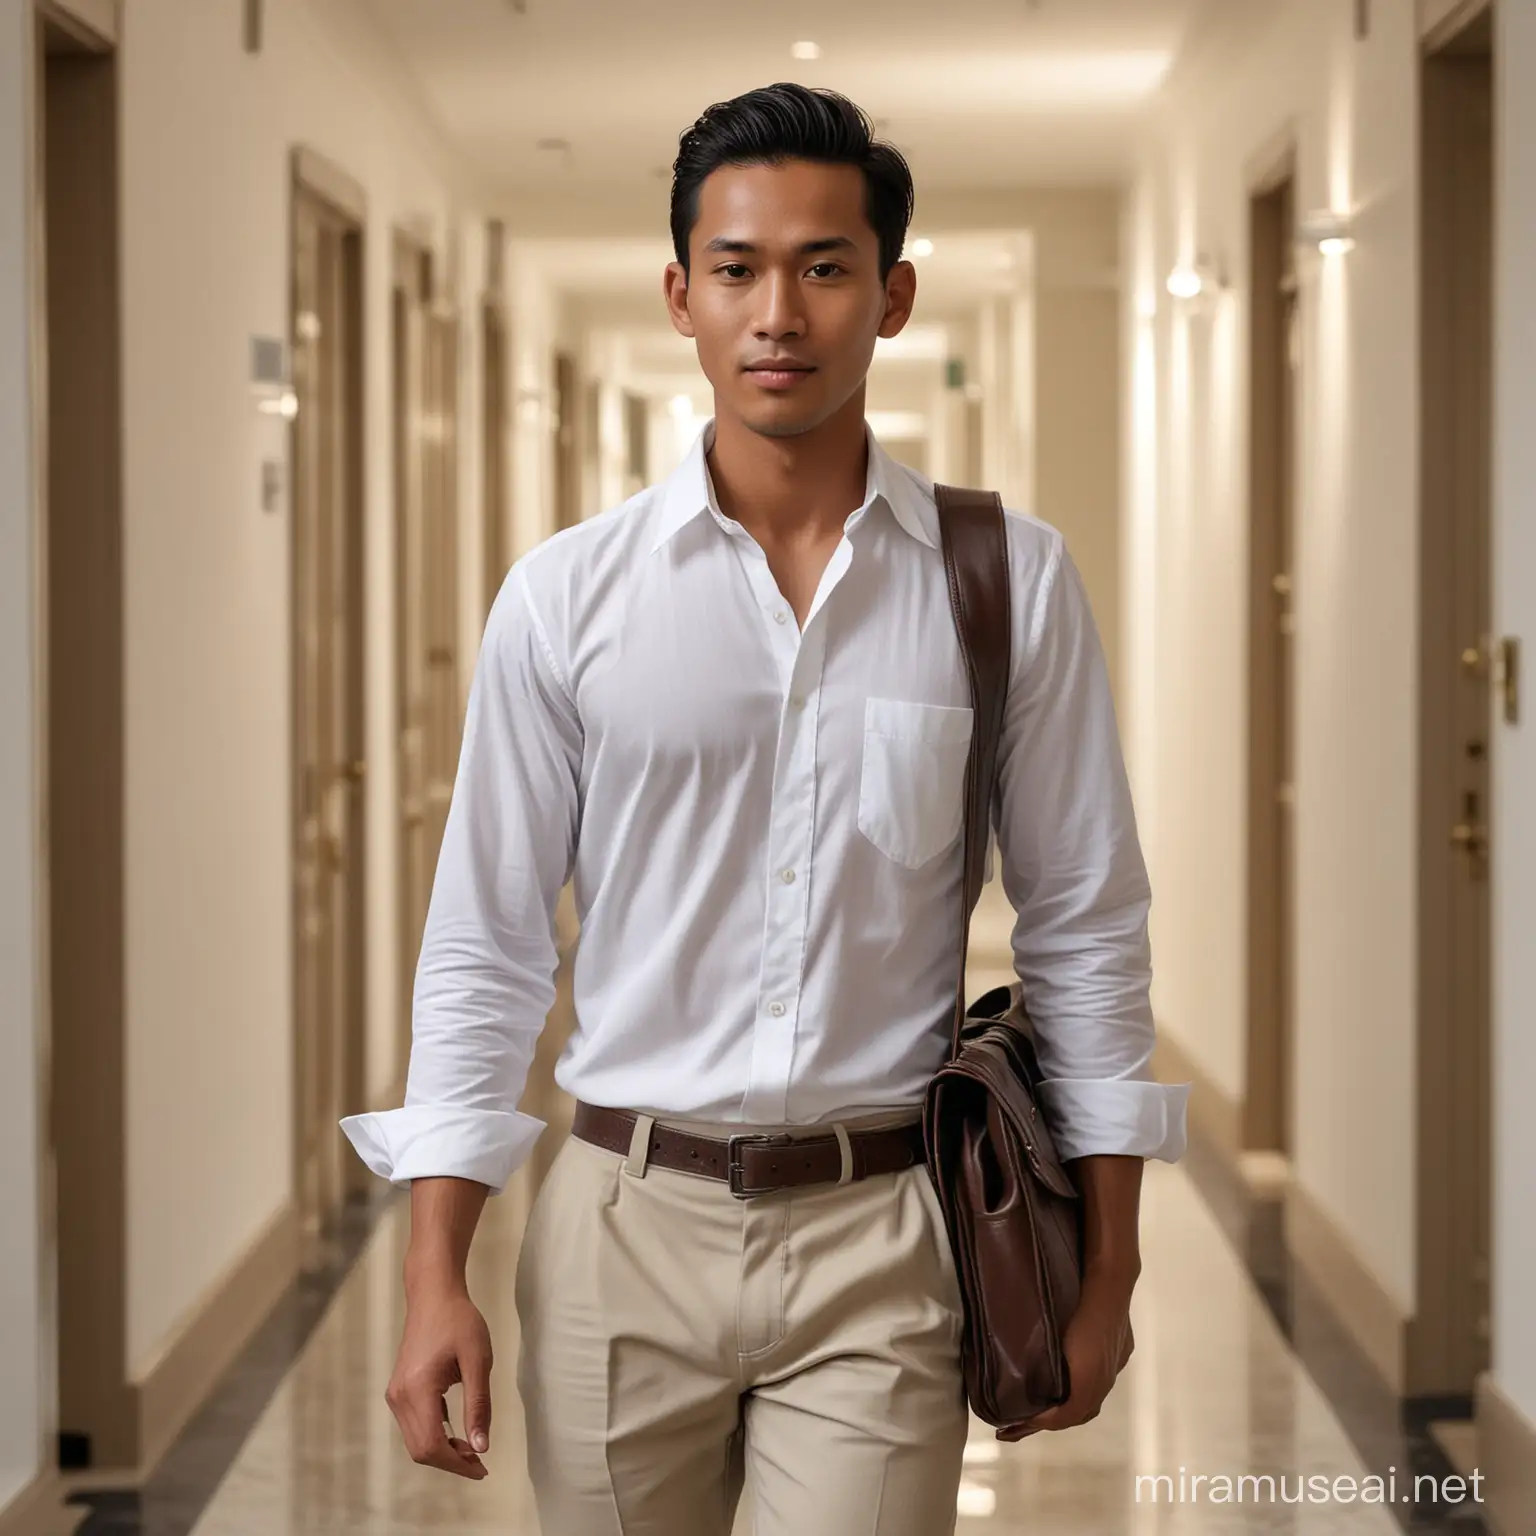 Young Indonesian Man Walking through Luxurious Hotel Corridors with Leather Bag